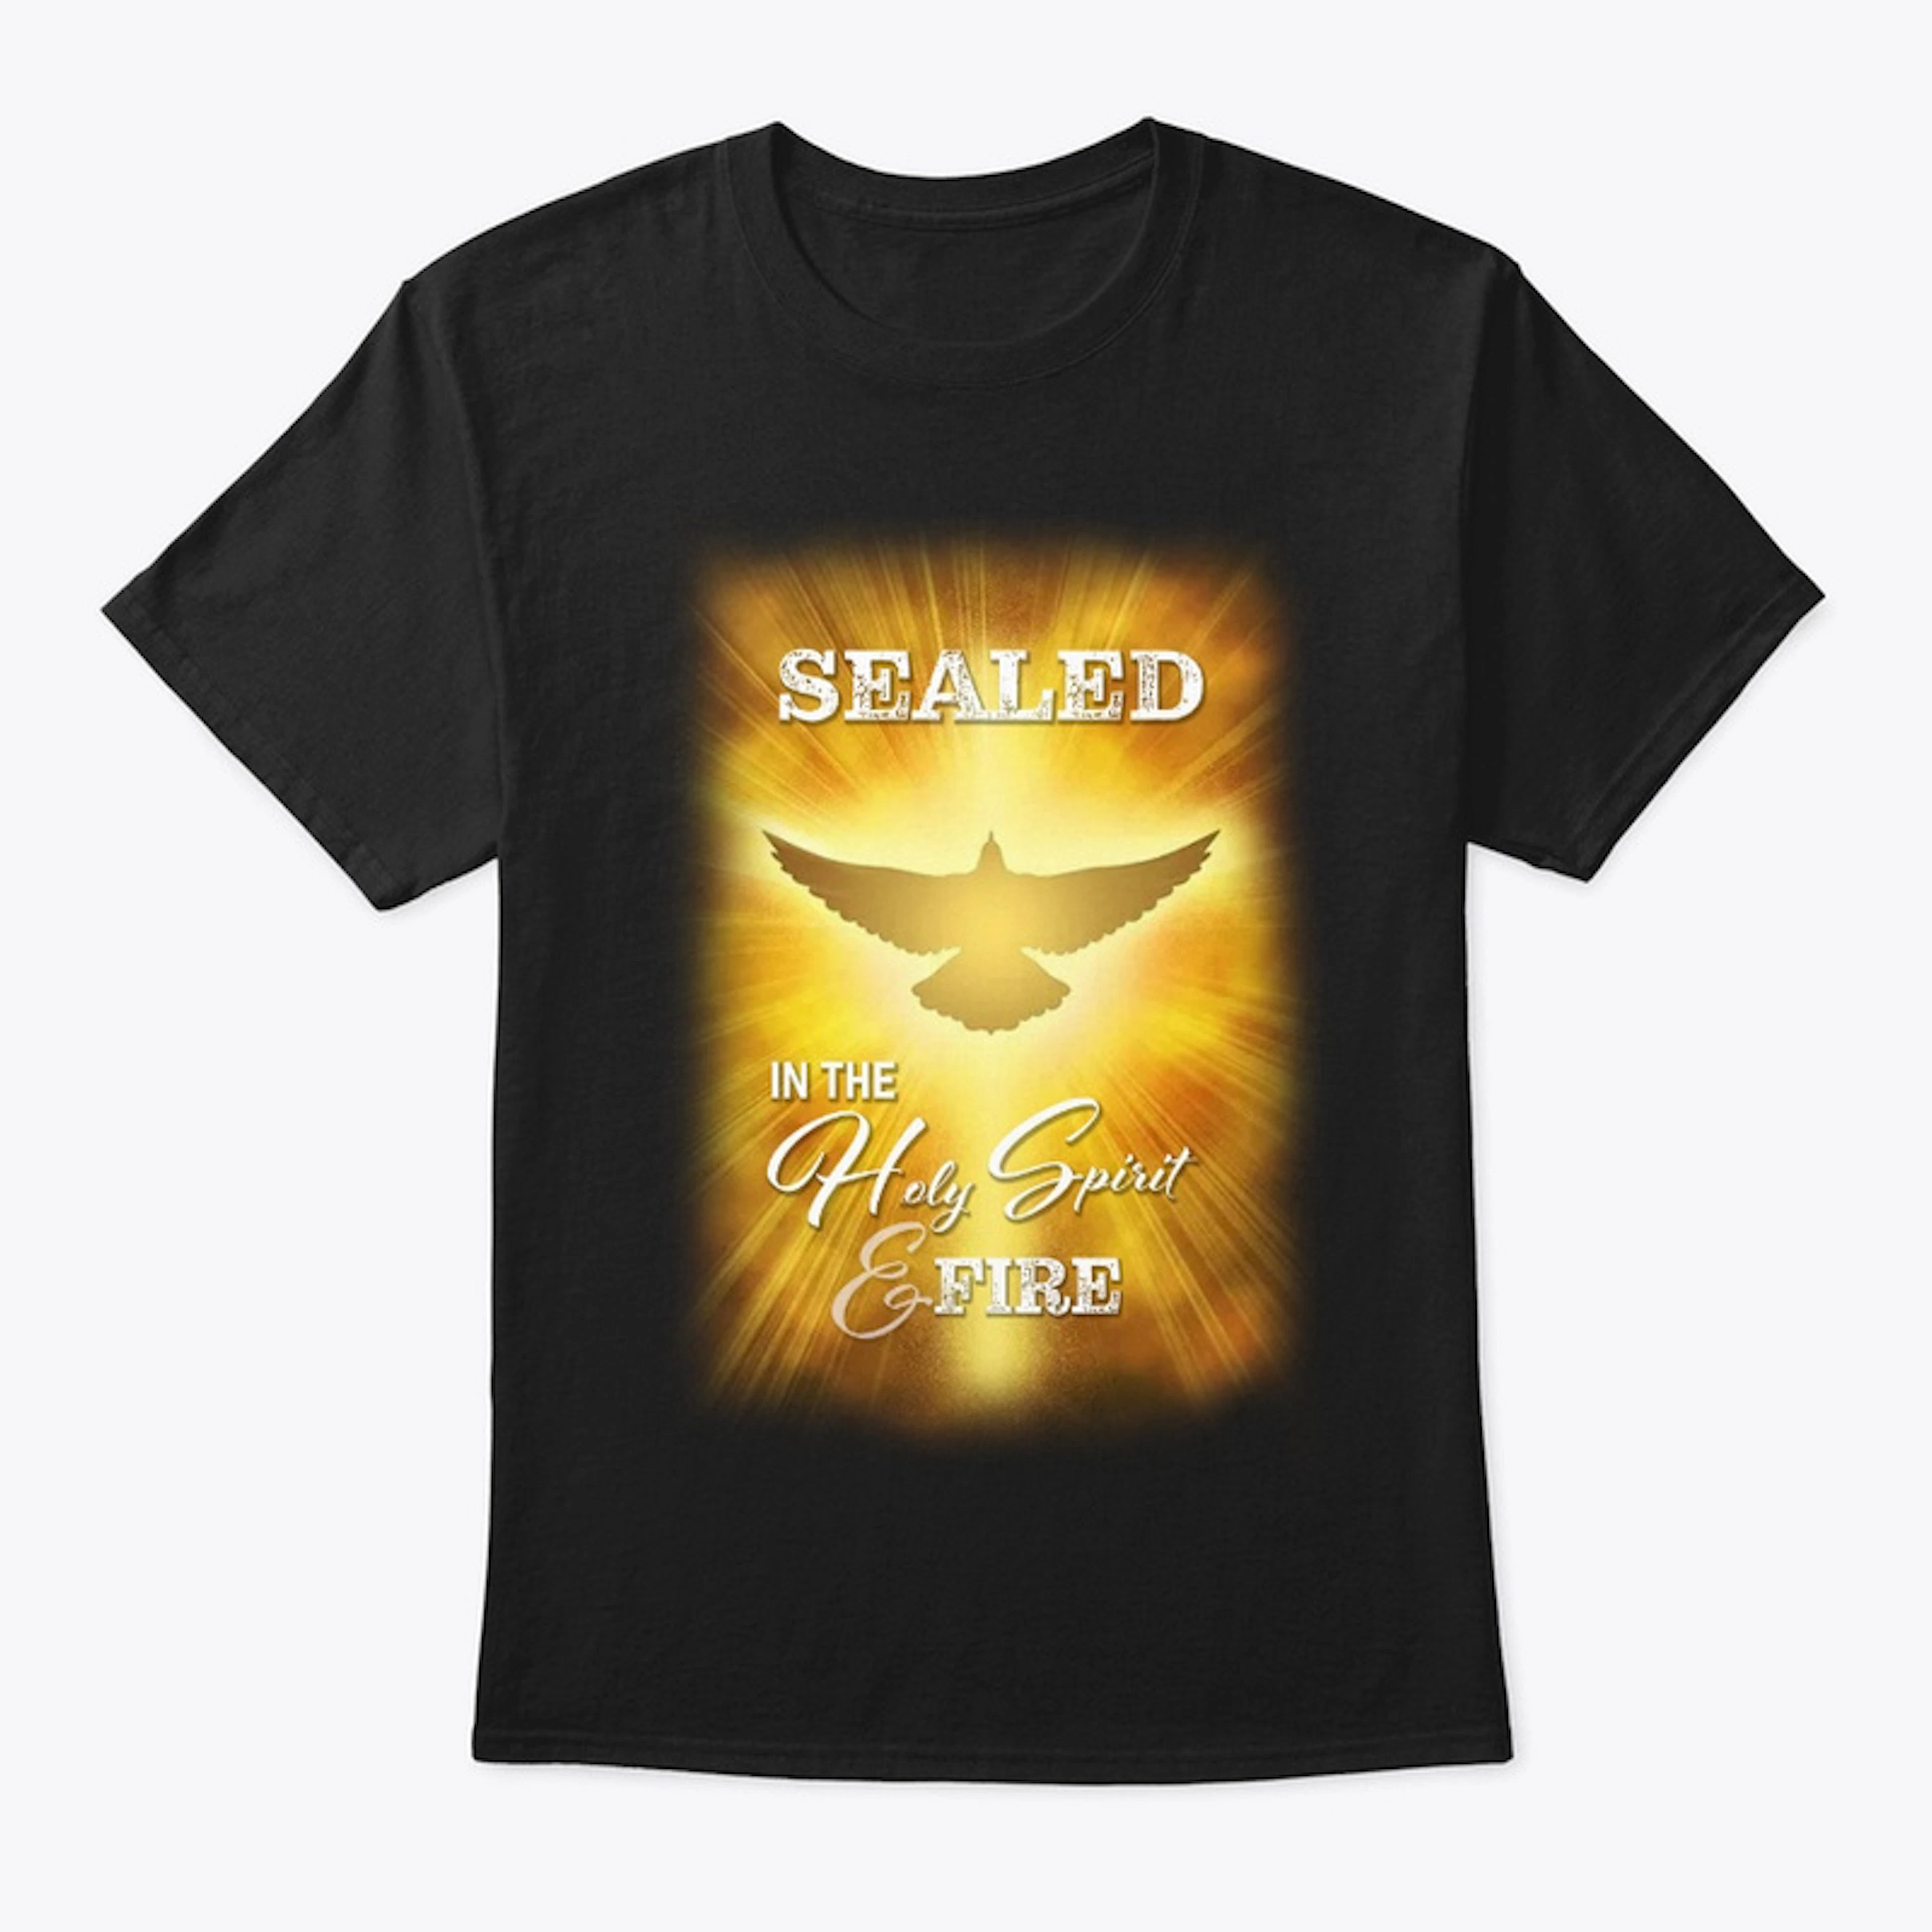 SEALED IN THE HOLY SPIRIT & FIRE Tshirt